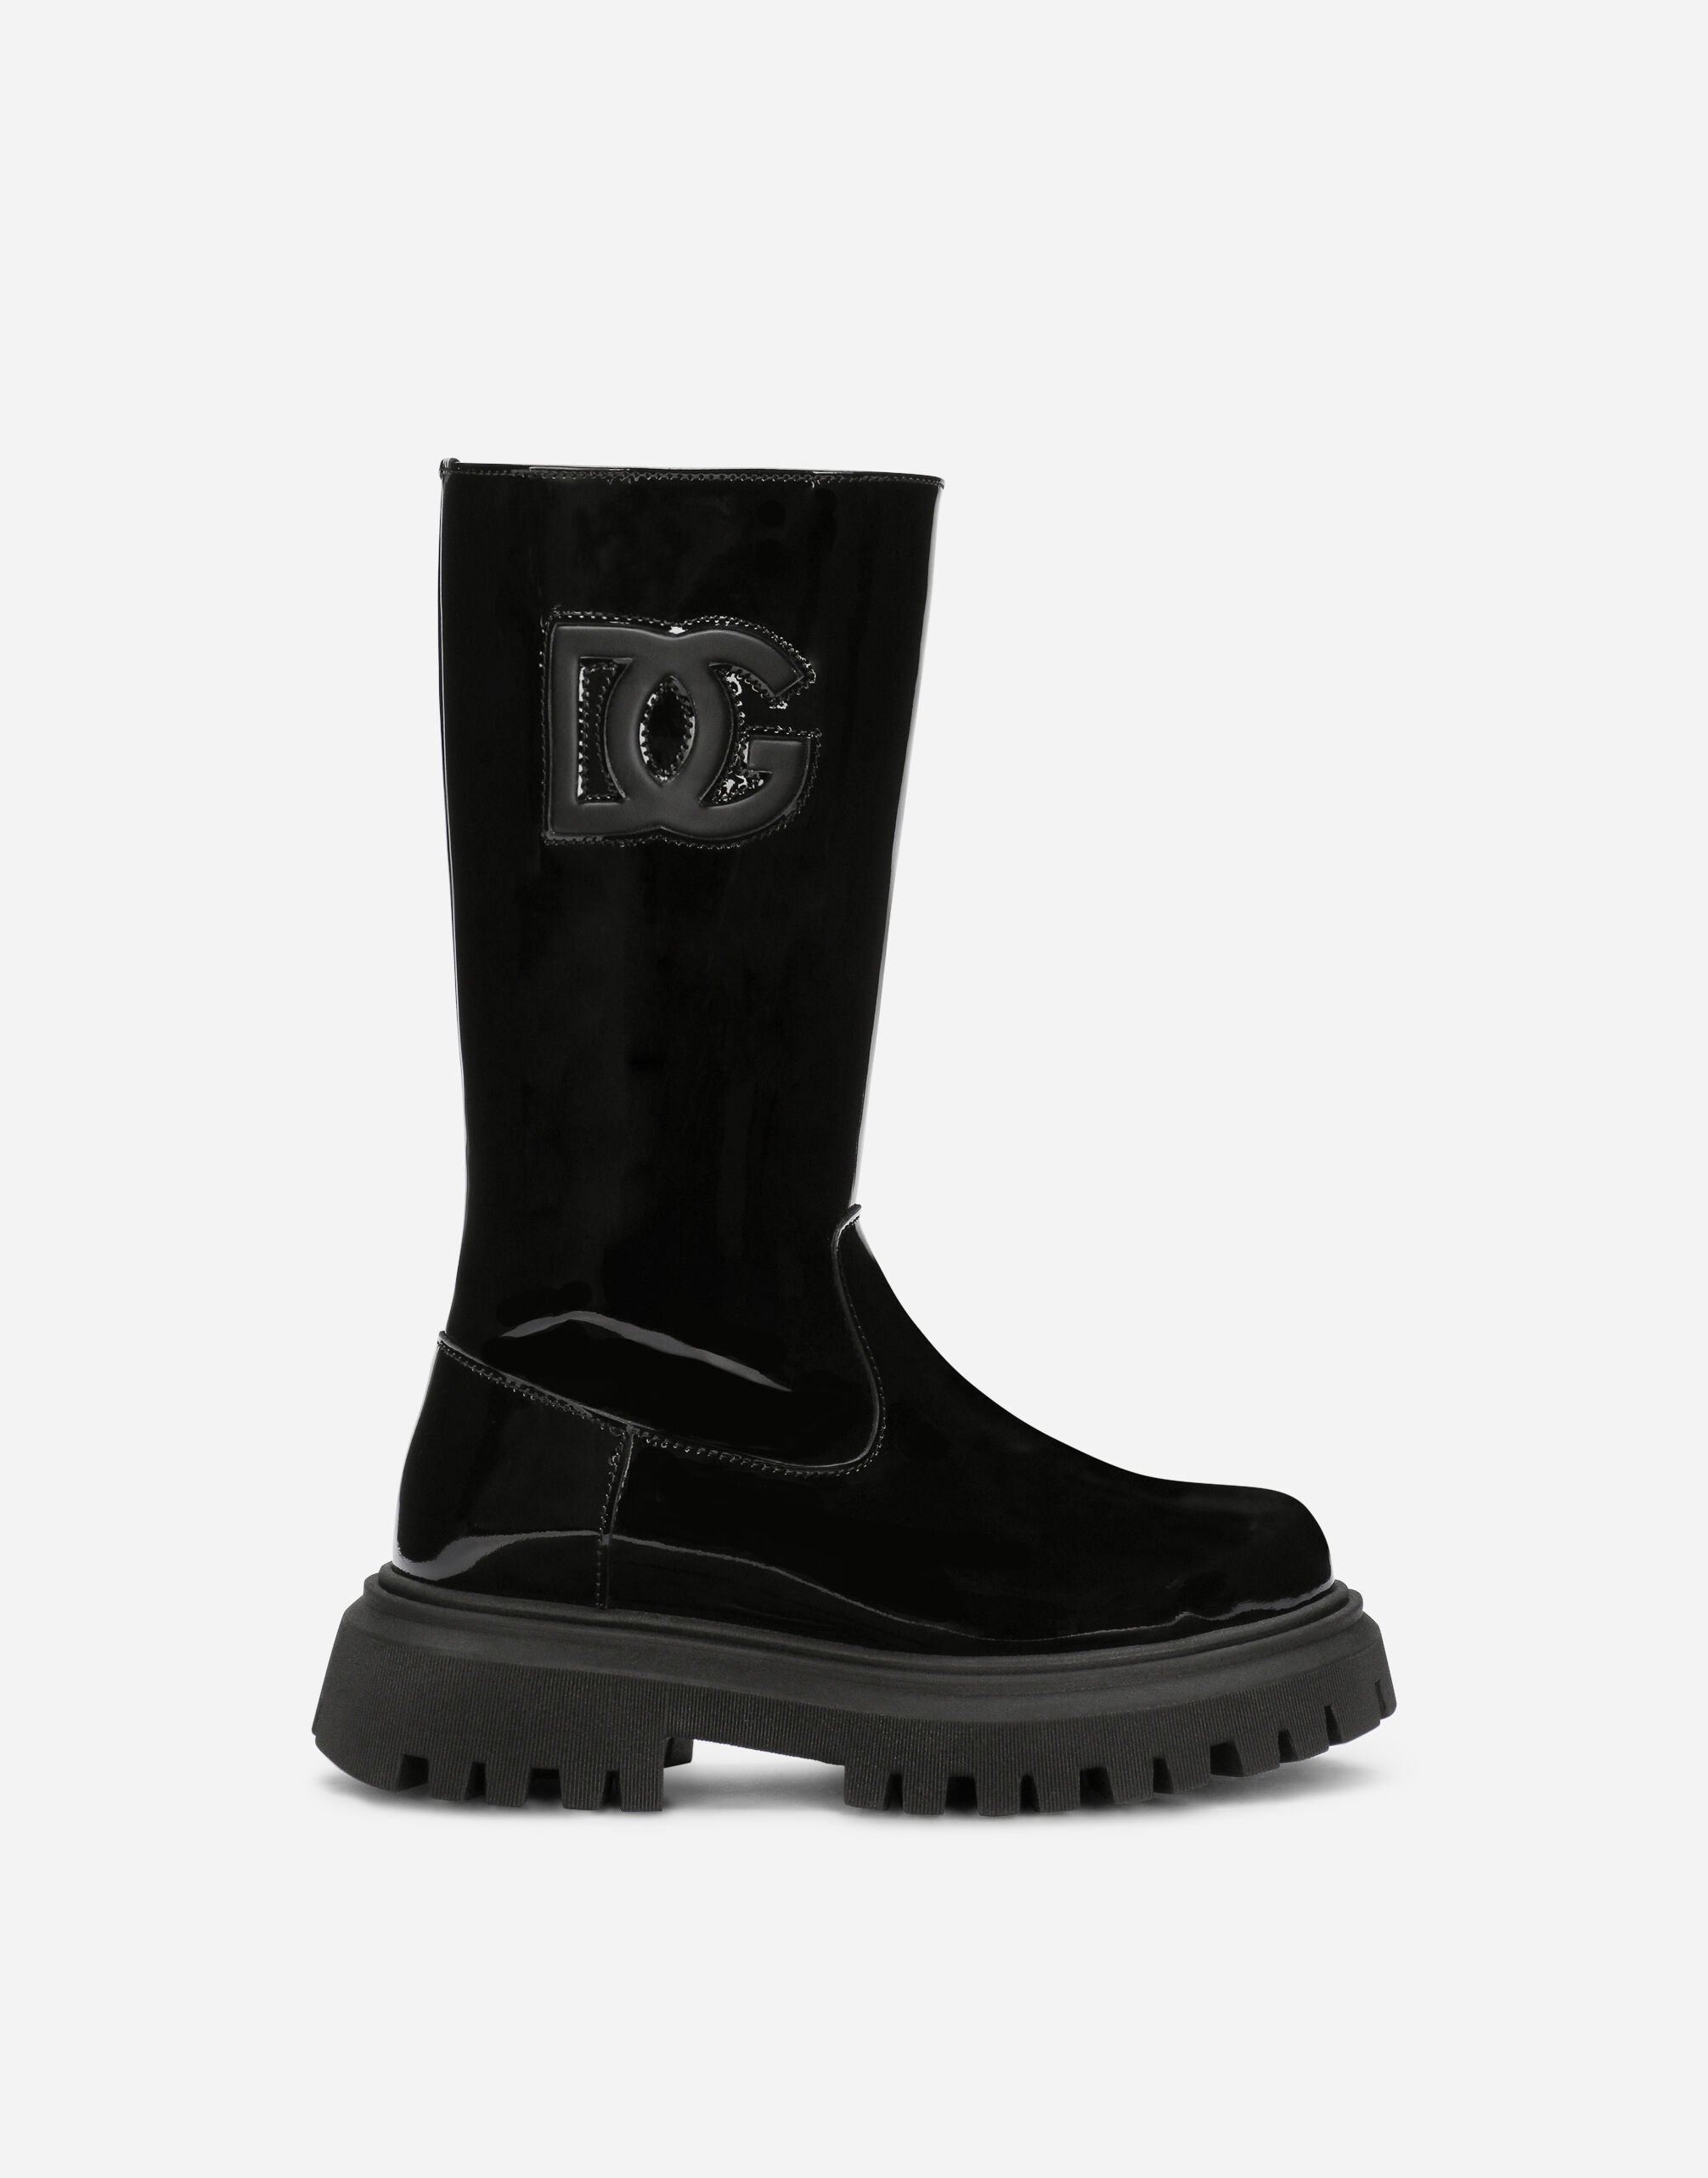 ${brand} Patent leather boots with inlaid DG logo ${colorDescription} ${masterID}